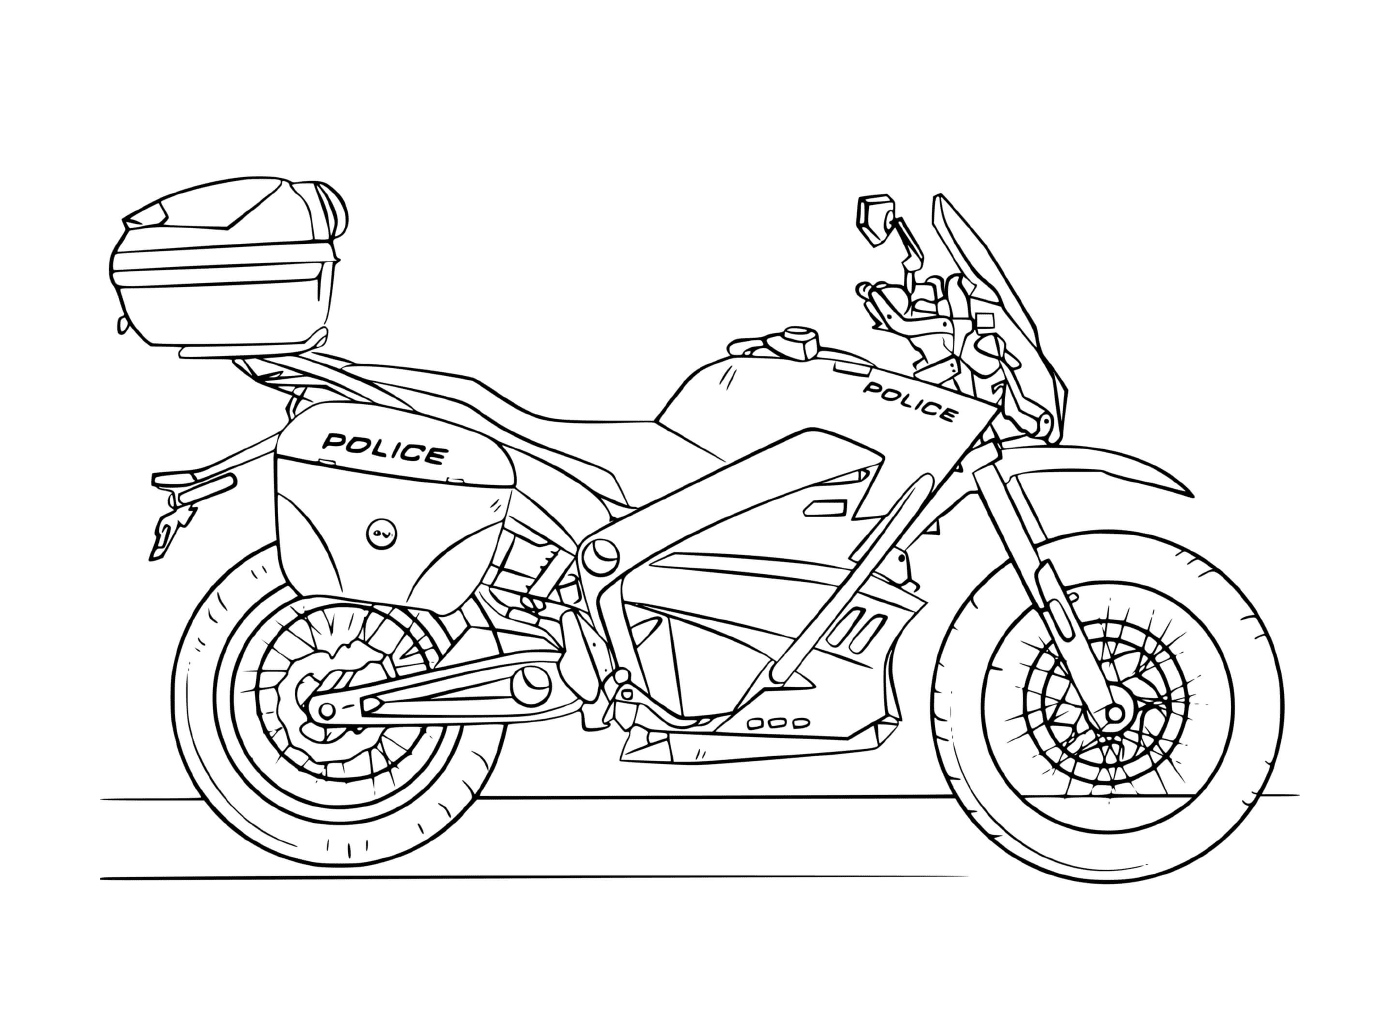   Moto police motorcycle 